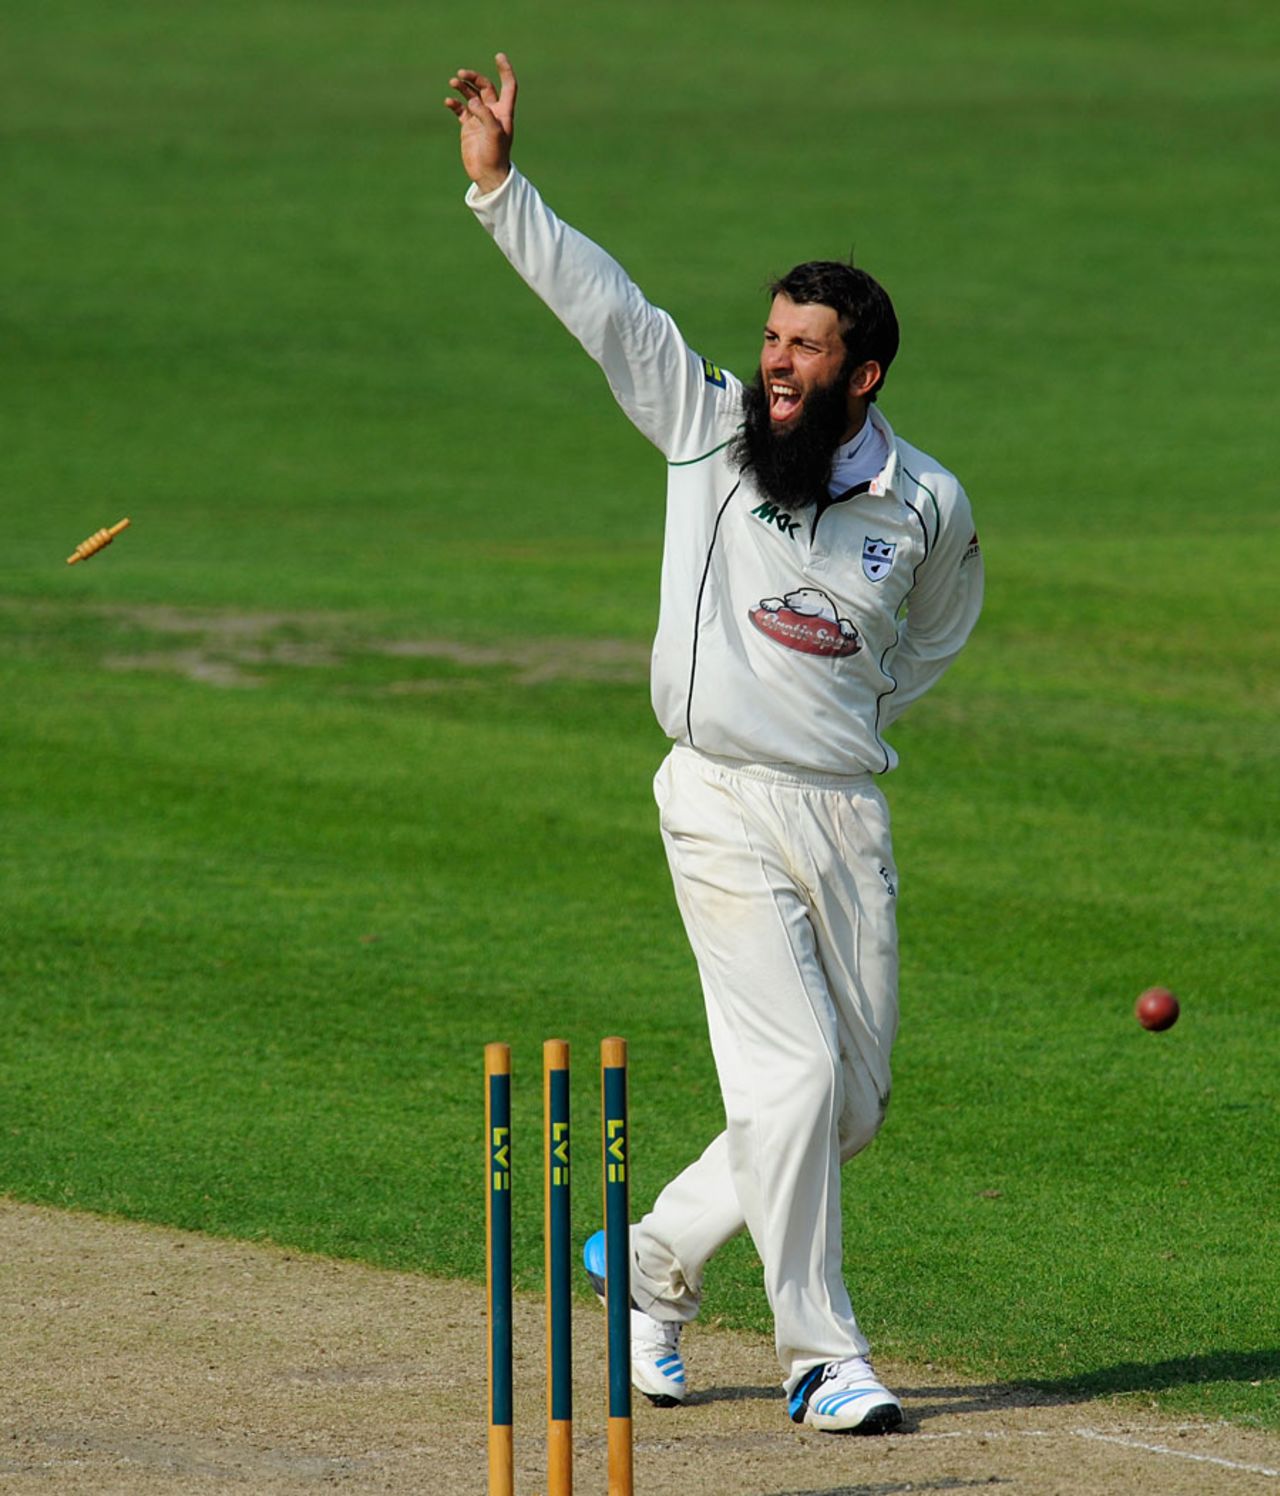 Moeen Ali appeals for a run out, Worcestershire v Surrey, County Championship, Division Two, New Road, September 10, 2014